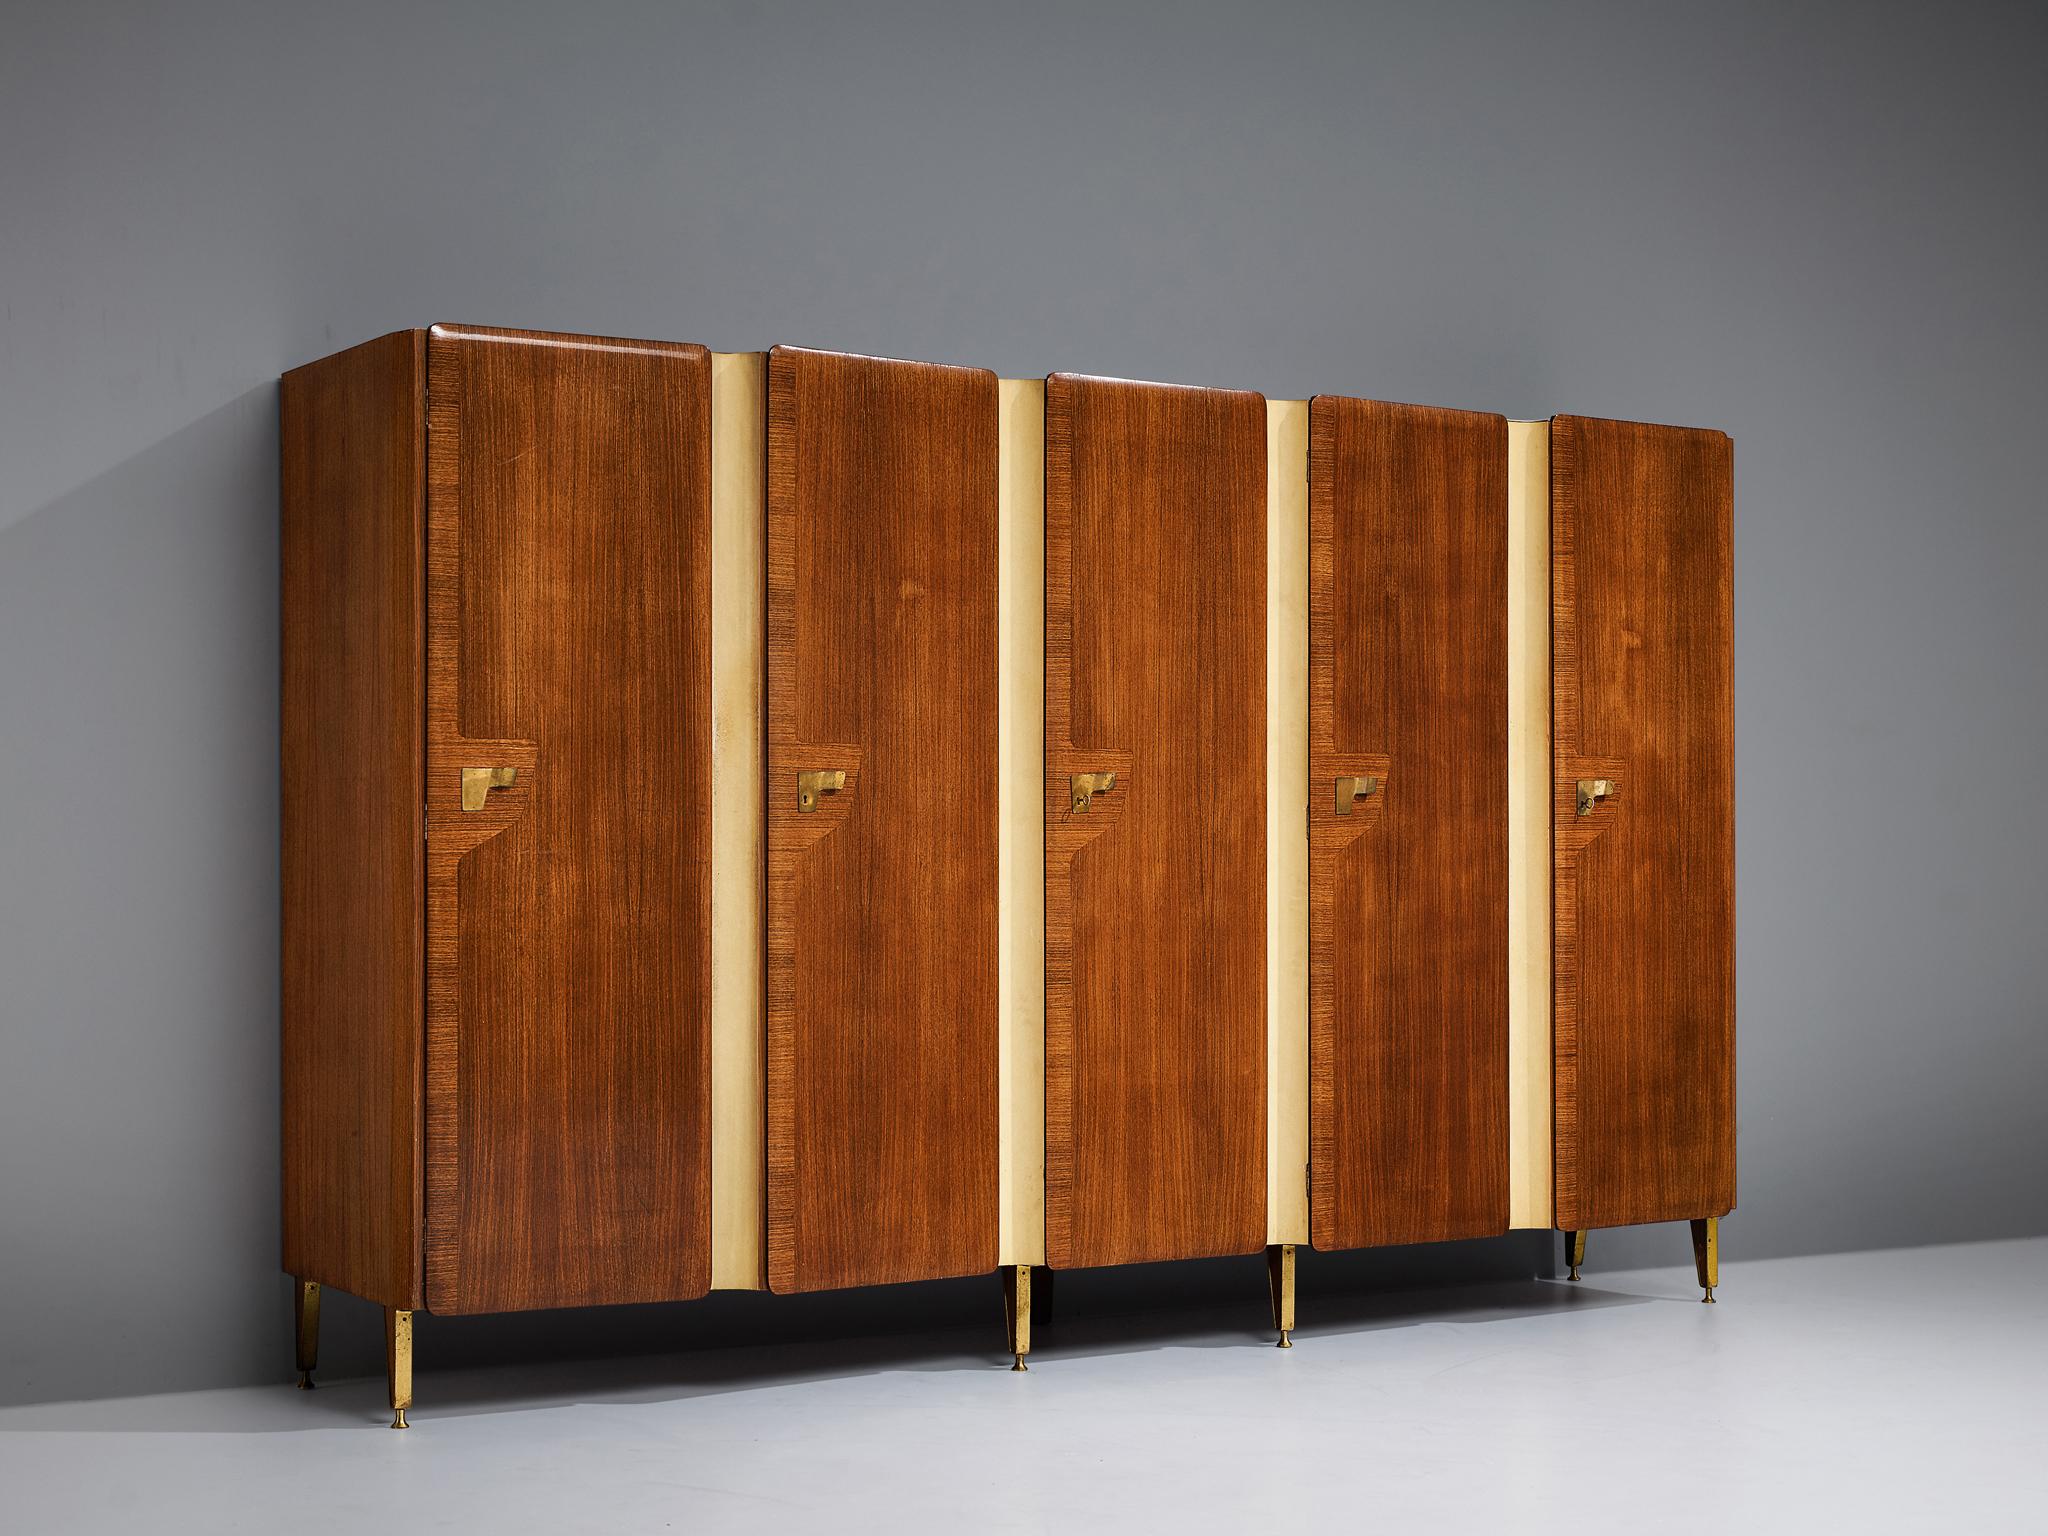 Large Italian wardrobe, walnut, synthetic material, brass, Italy, 1950s

With the combination of bright stripes in vertical direction alternating with the dark walnut doors with golden colored brass handels gives this wardrobe a strong visual